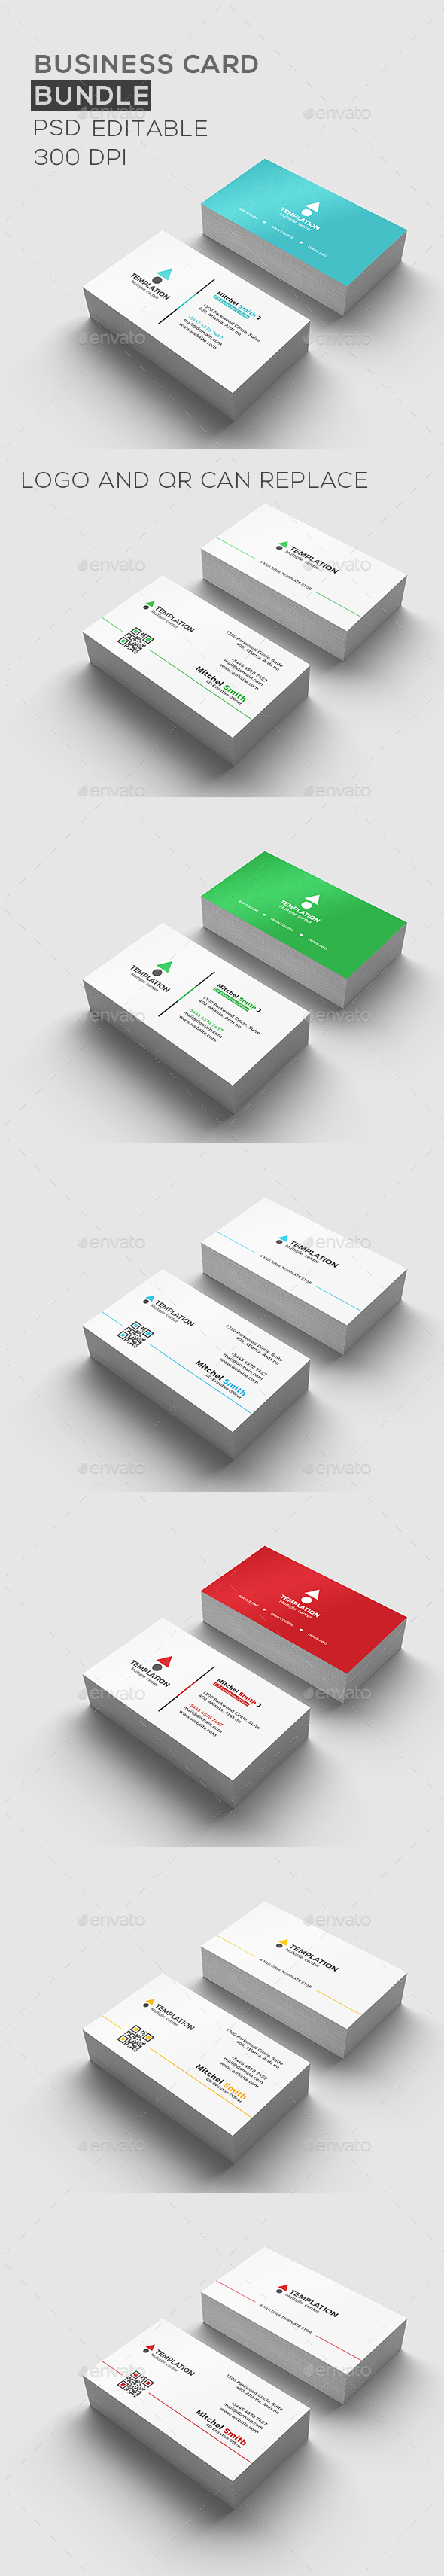 Business Card in Business Card Templates